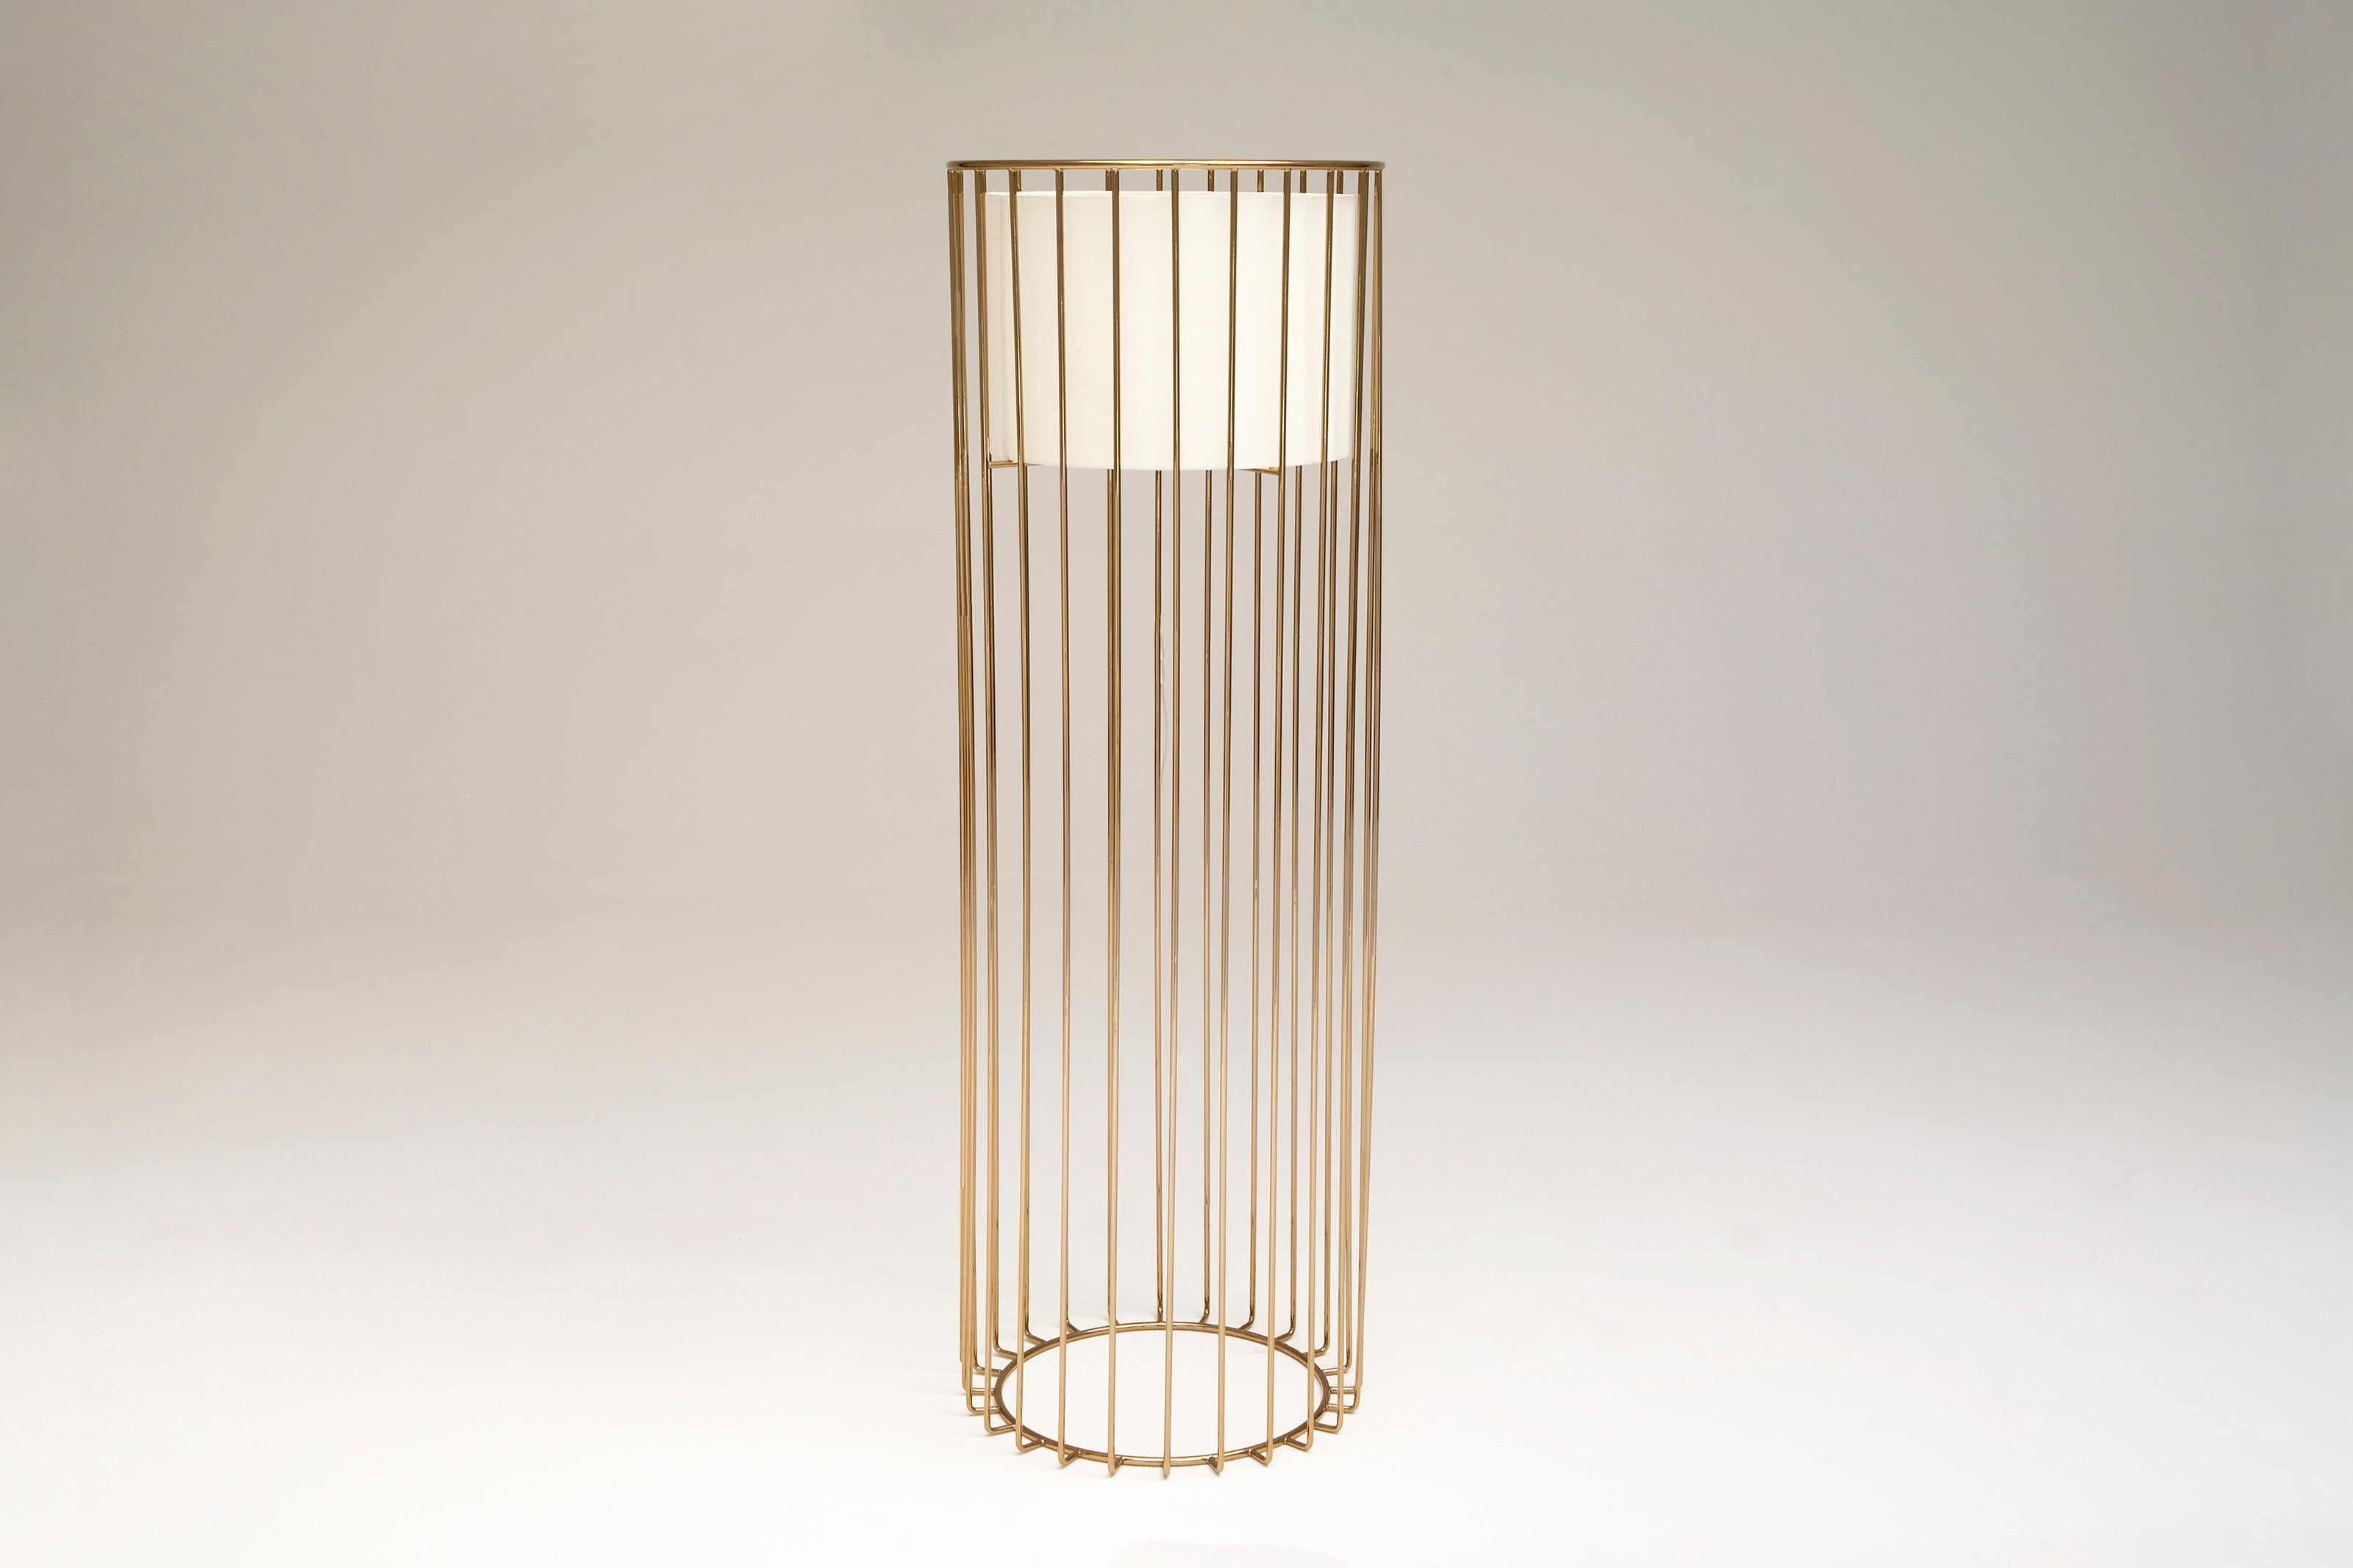 Inner Beauty Tall Floor Light by Phase Design
Dimensions: Ø 61 x H 182.9 cm. 
Materials: Linen and smoked brass.

Solid steel bar available in a smoked brass, polished chrome, burnt copper, gloss or flat black and white powder coat. Powder coat